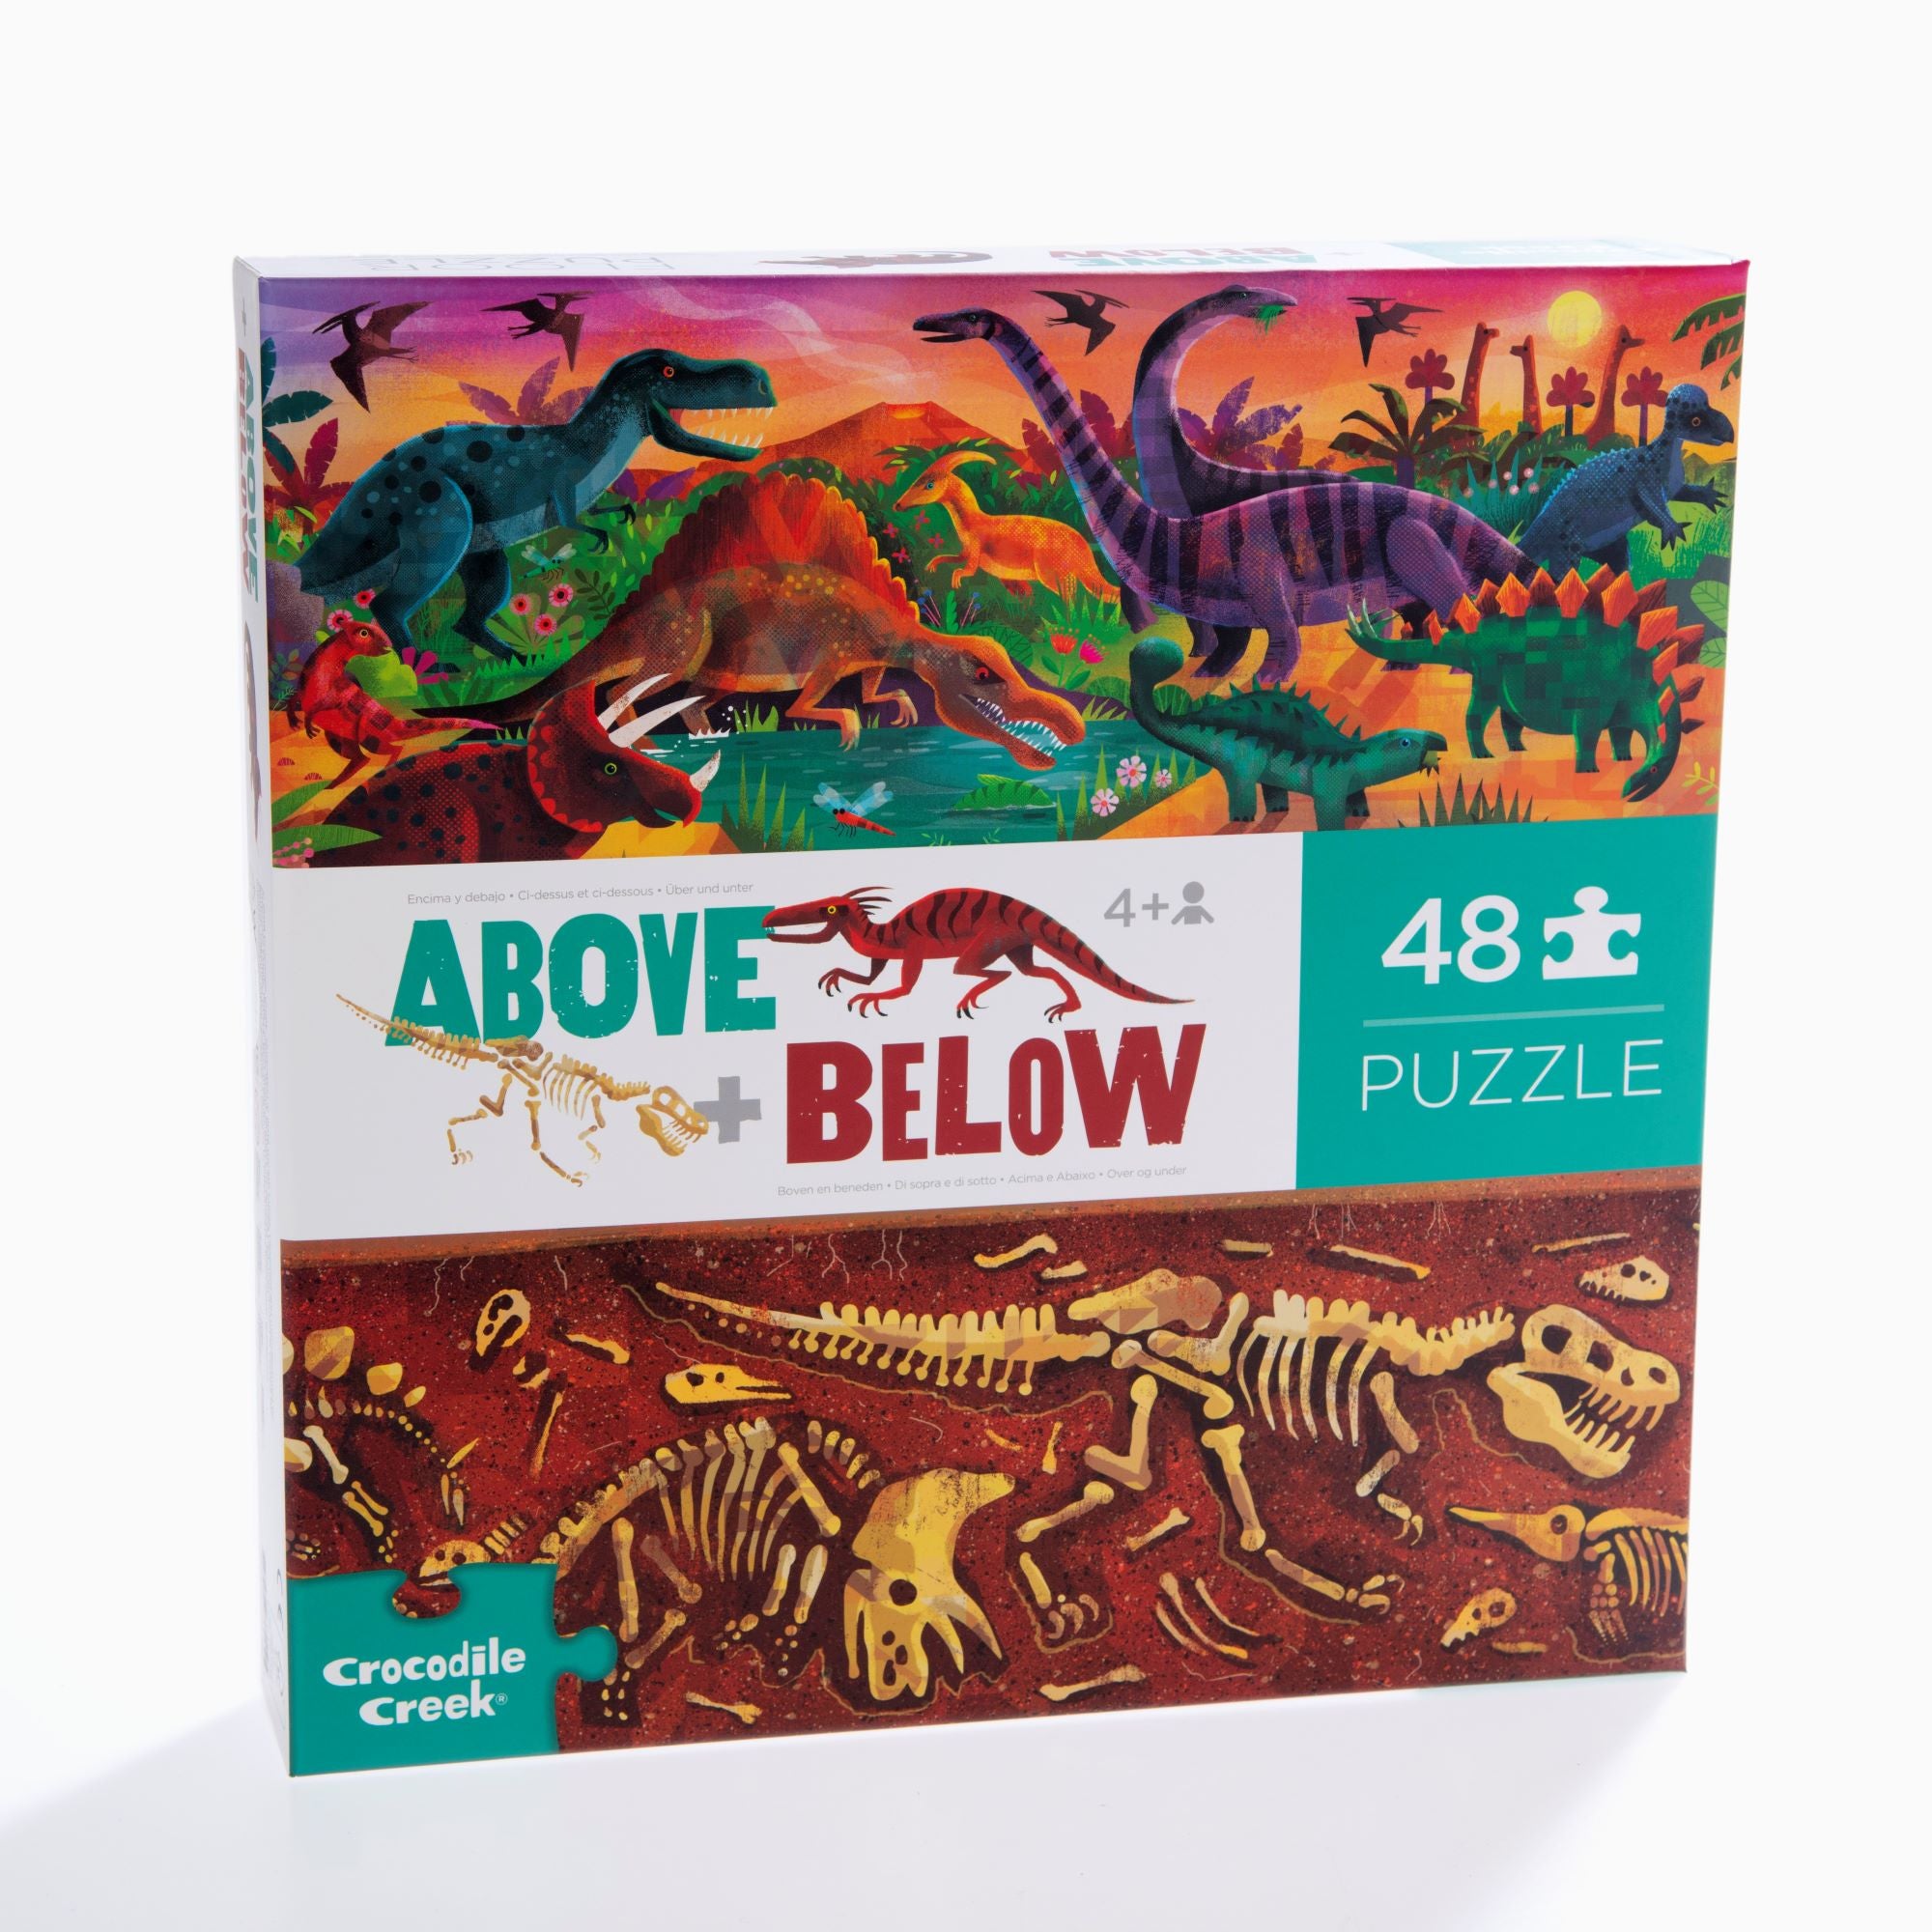 Above and Below Puzzle (48pc)